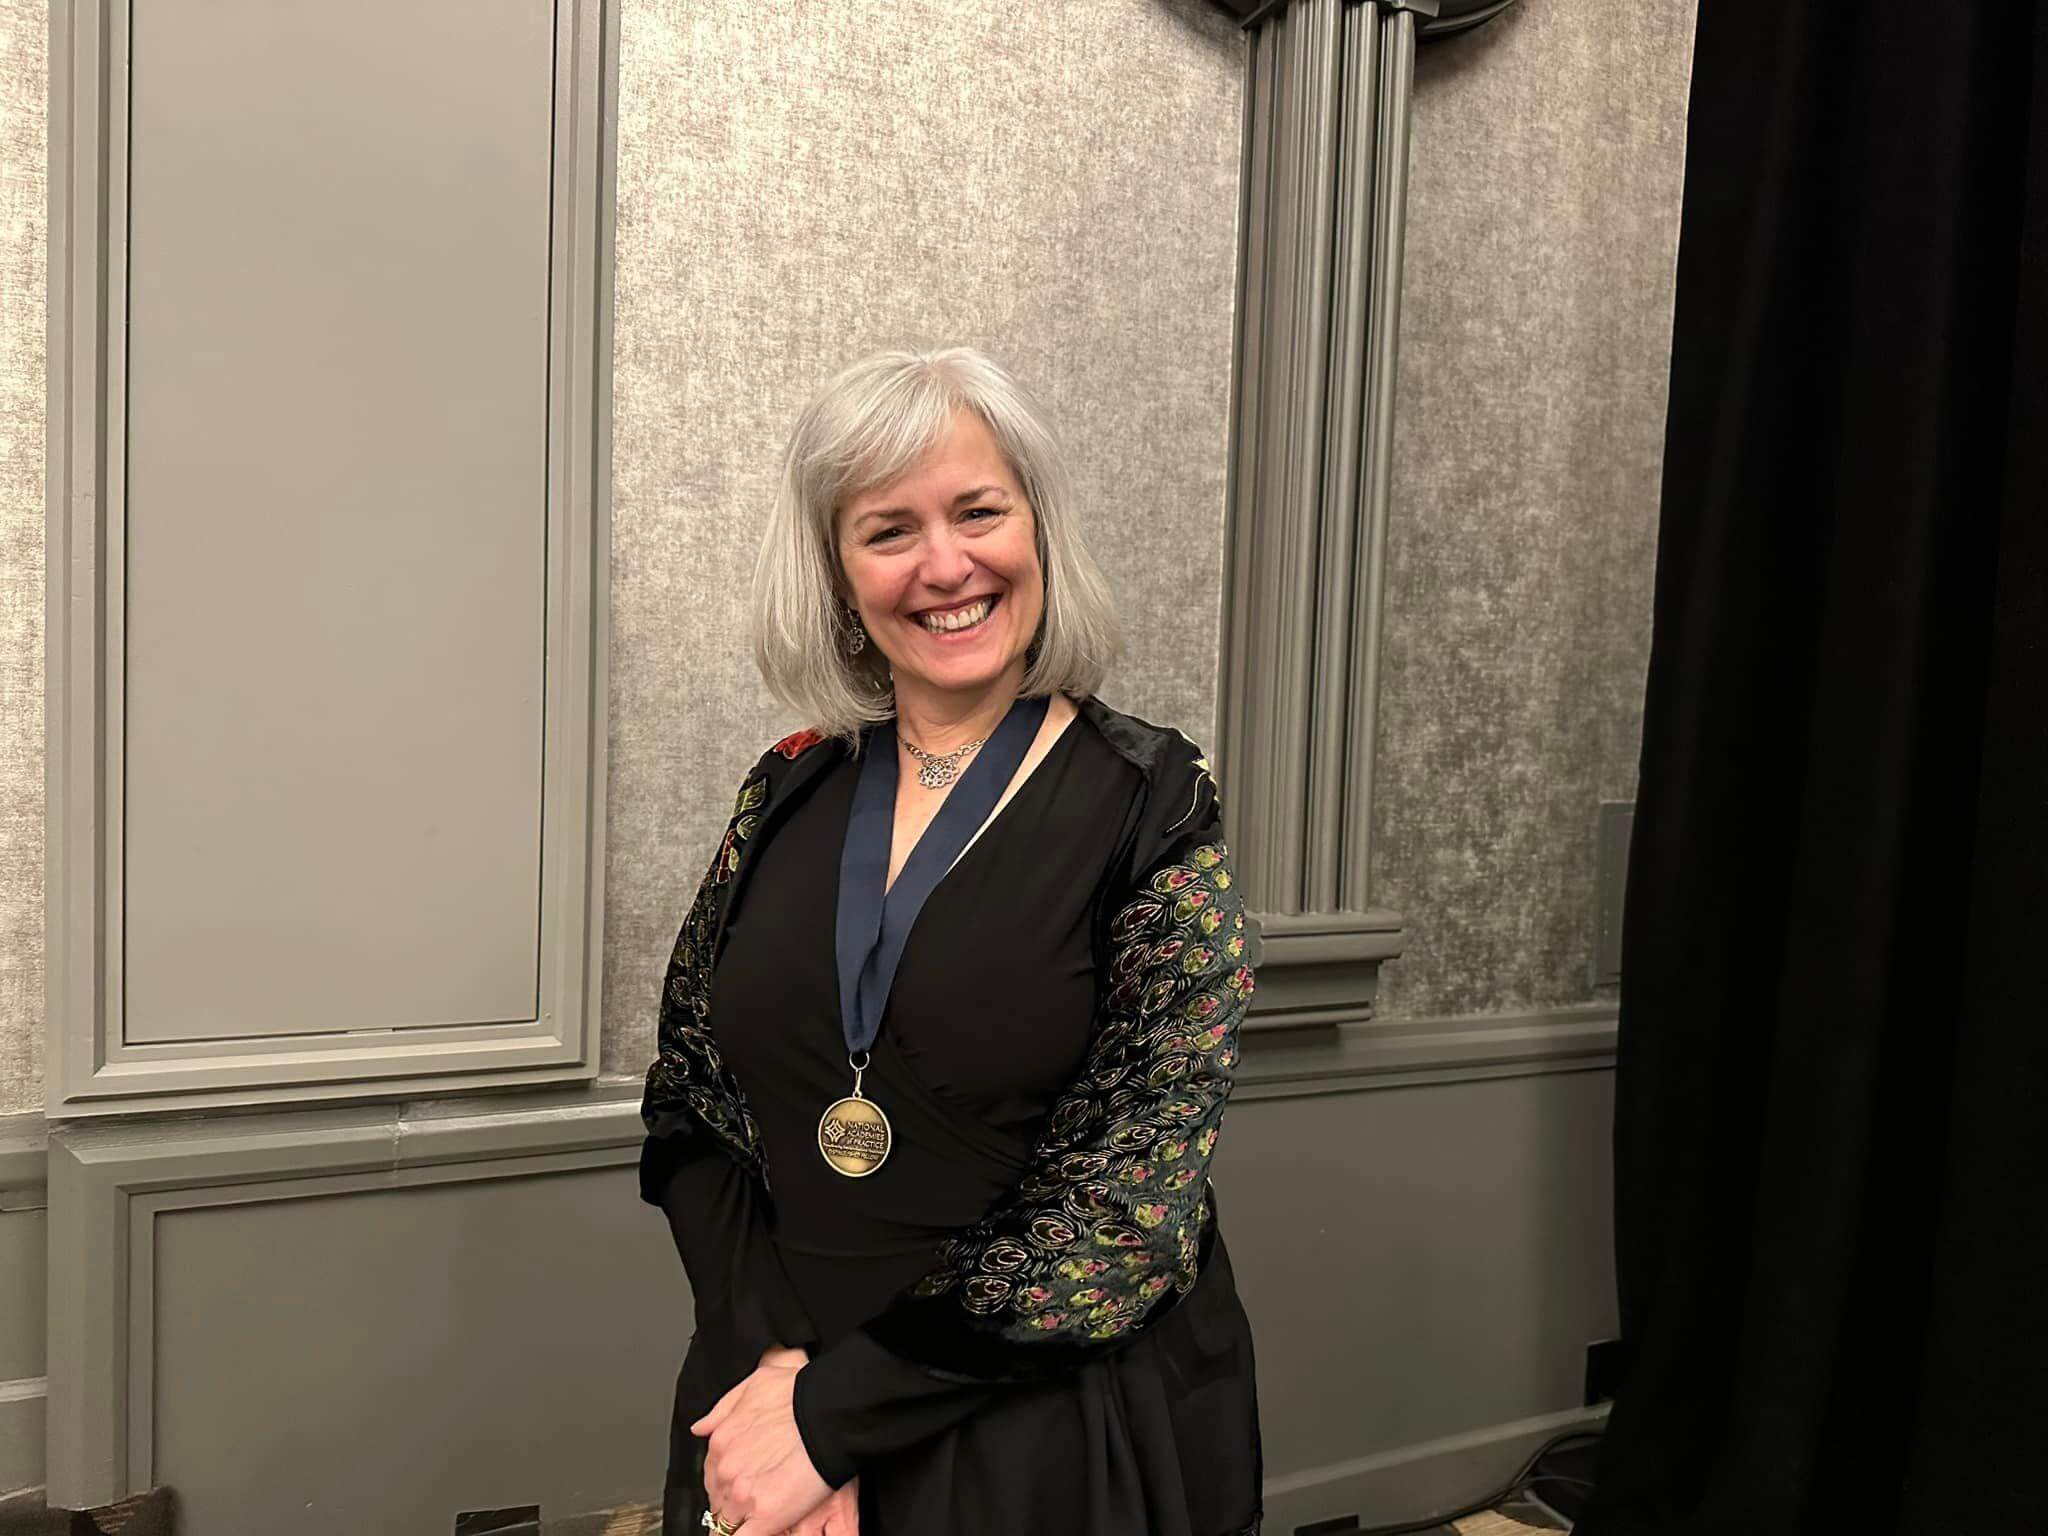 Professor and Chair of the Department of Nursing Annemarie Dowling-Castronovo was inducted into the National Academies of Practice.